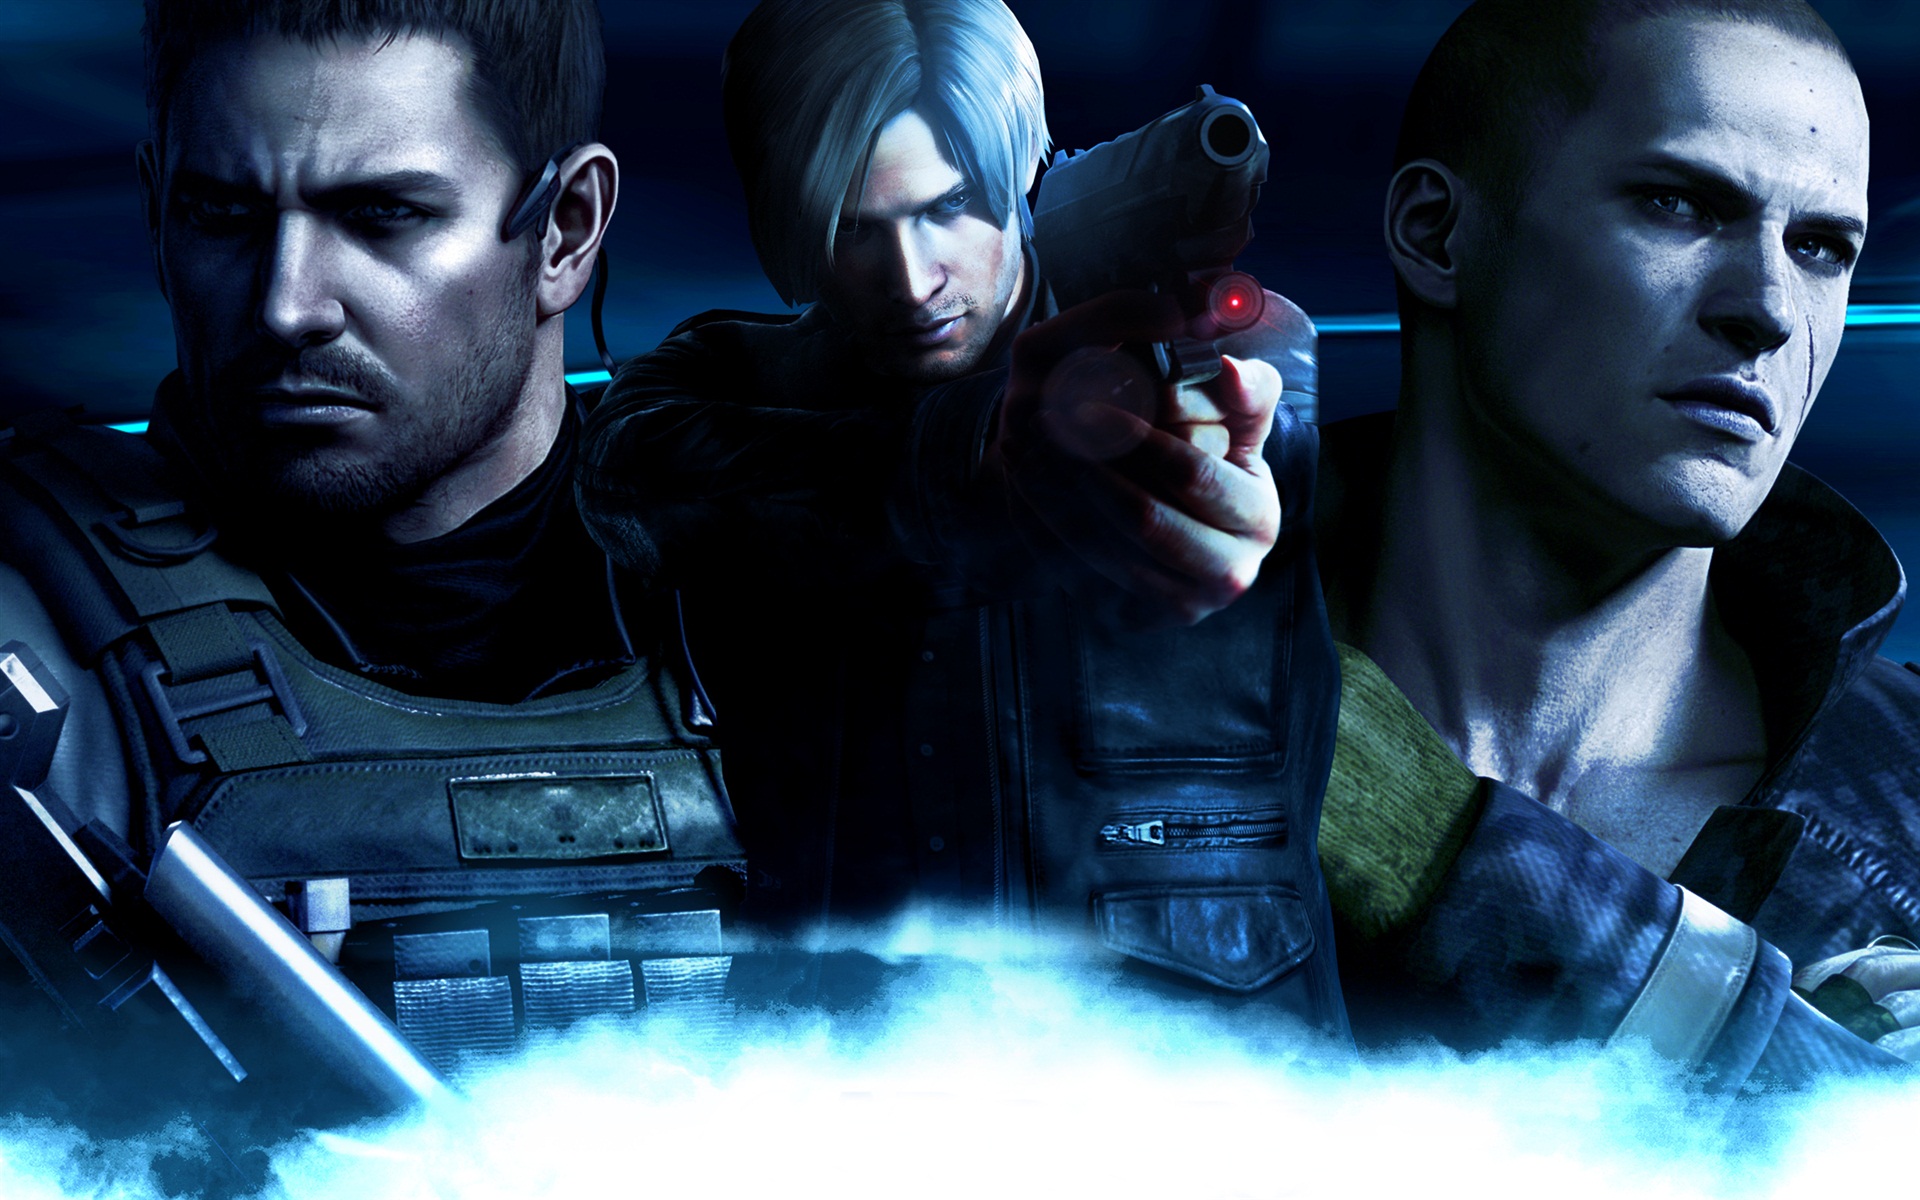 Resident Evil 6 HD game wallpapers #6 - 1920x1200